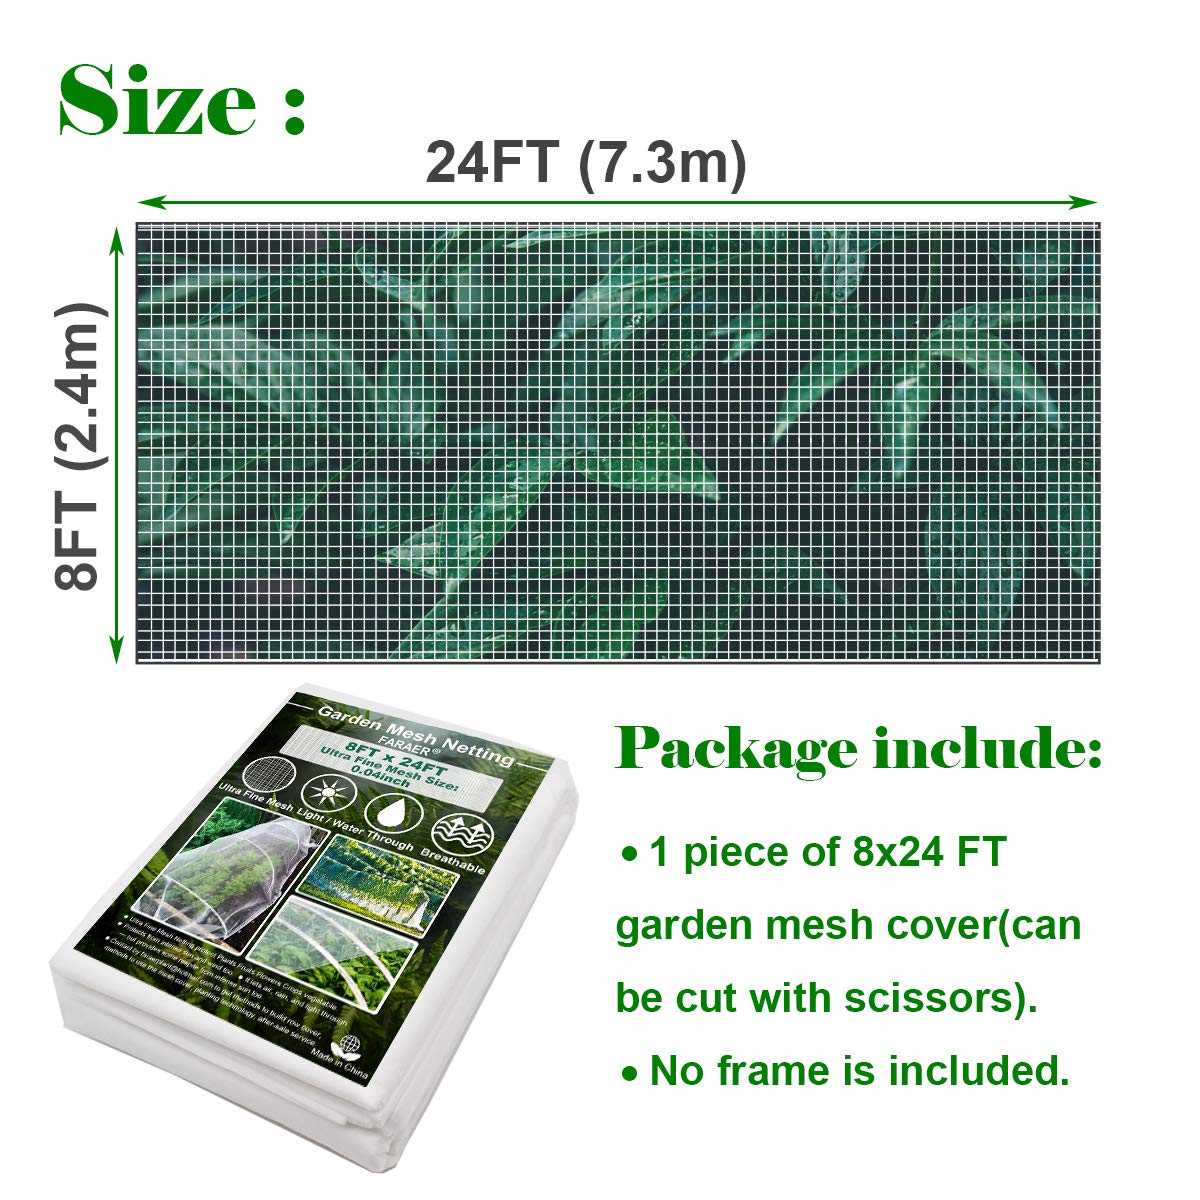 Ultra Fine Garden Mesh Netting, Plant Covers 8'x24' Garden Netting for Protect Vegetable Plants Fruits Flowers Crops Greenhouse Row Cover Protection Mesh Net Covers Patio Gazebo Screen Barrier Net